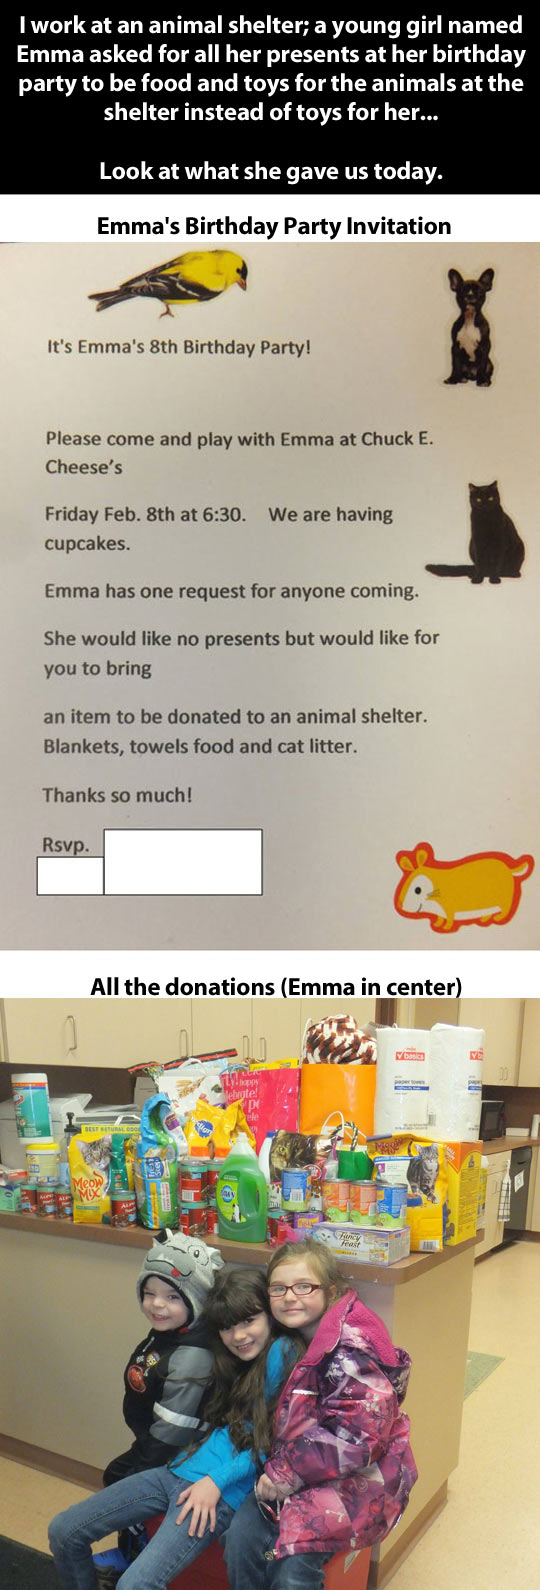 kid, faith in humanity, birthday presents, donations to an animal shelter